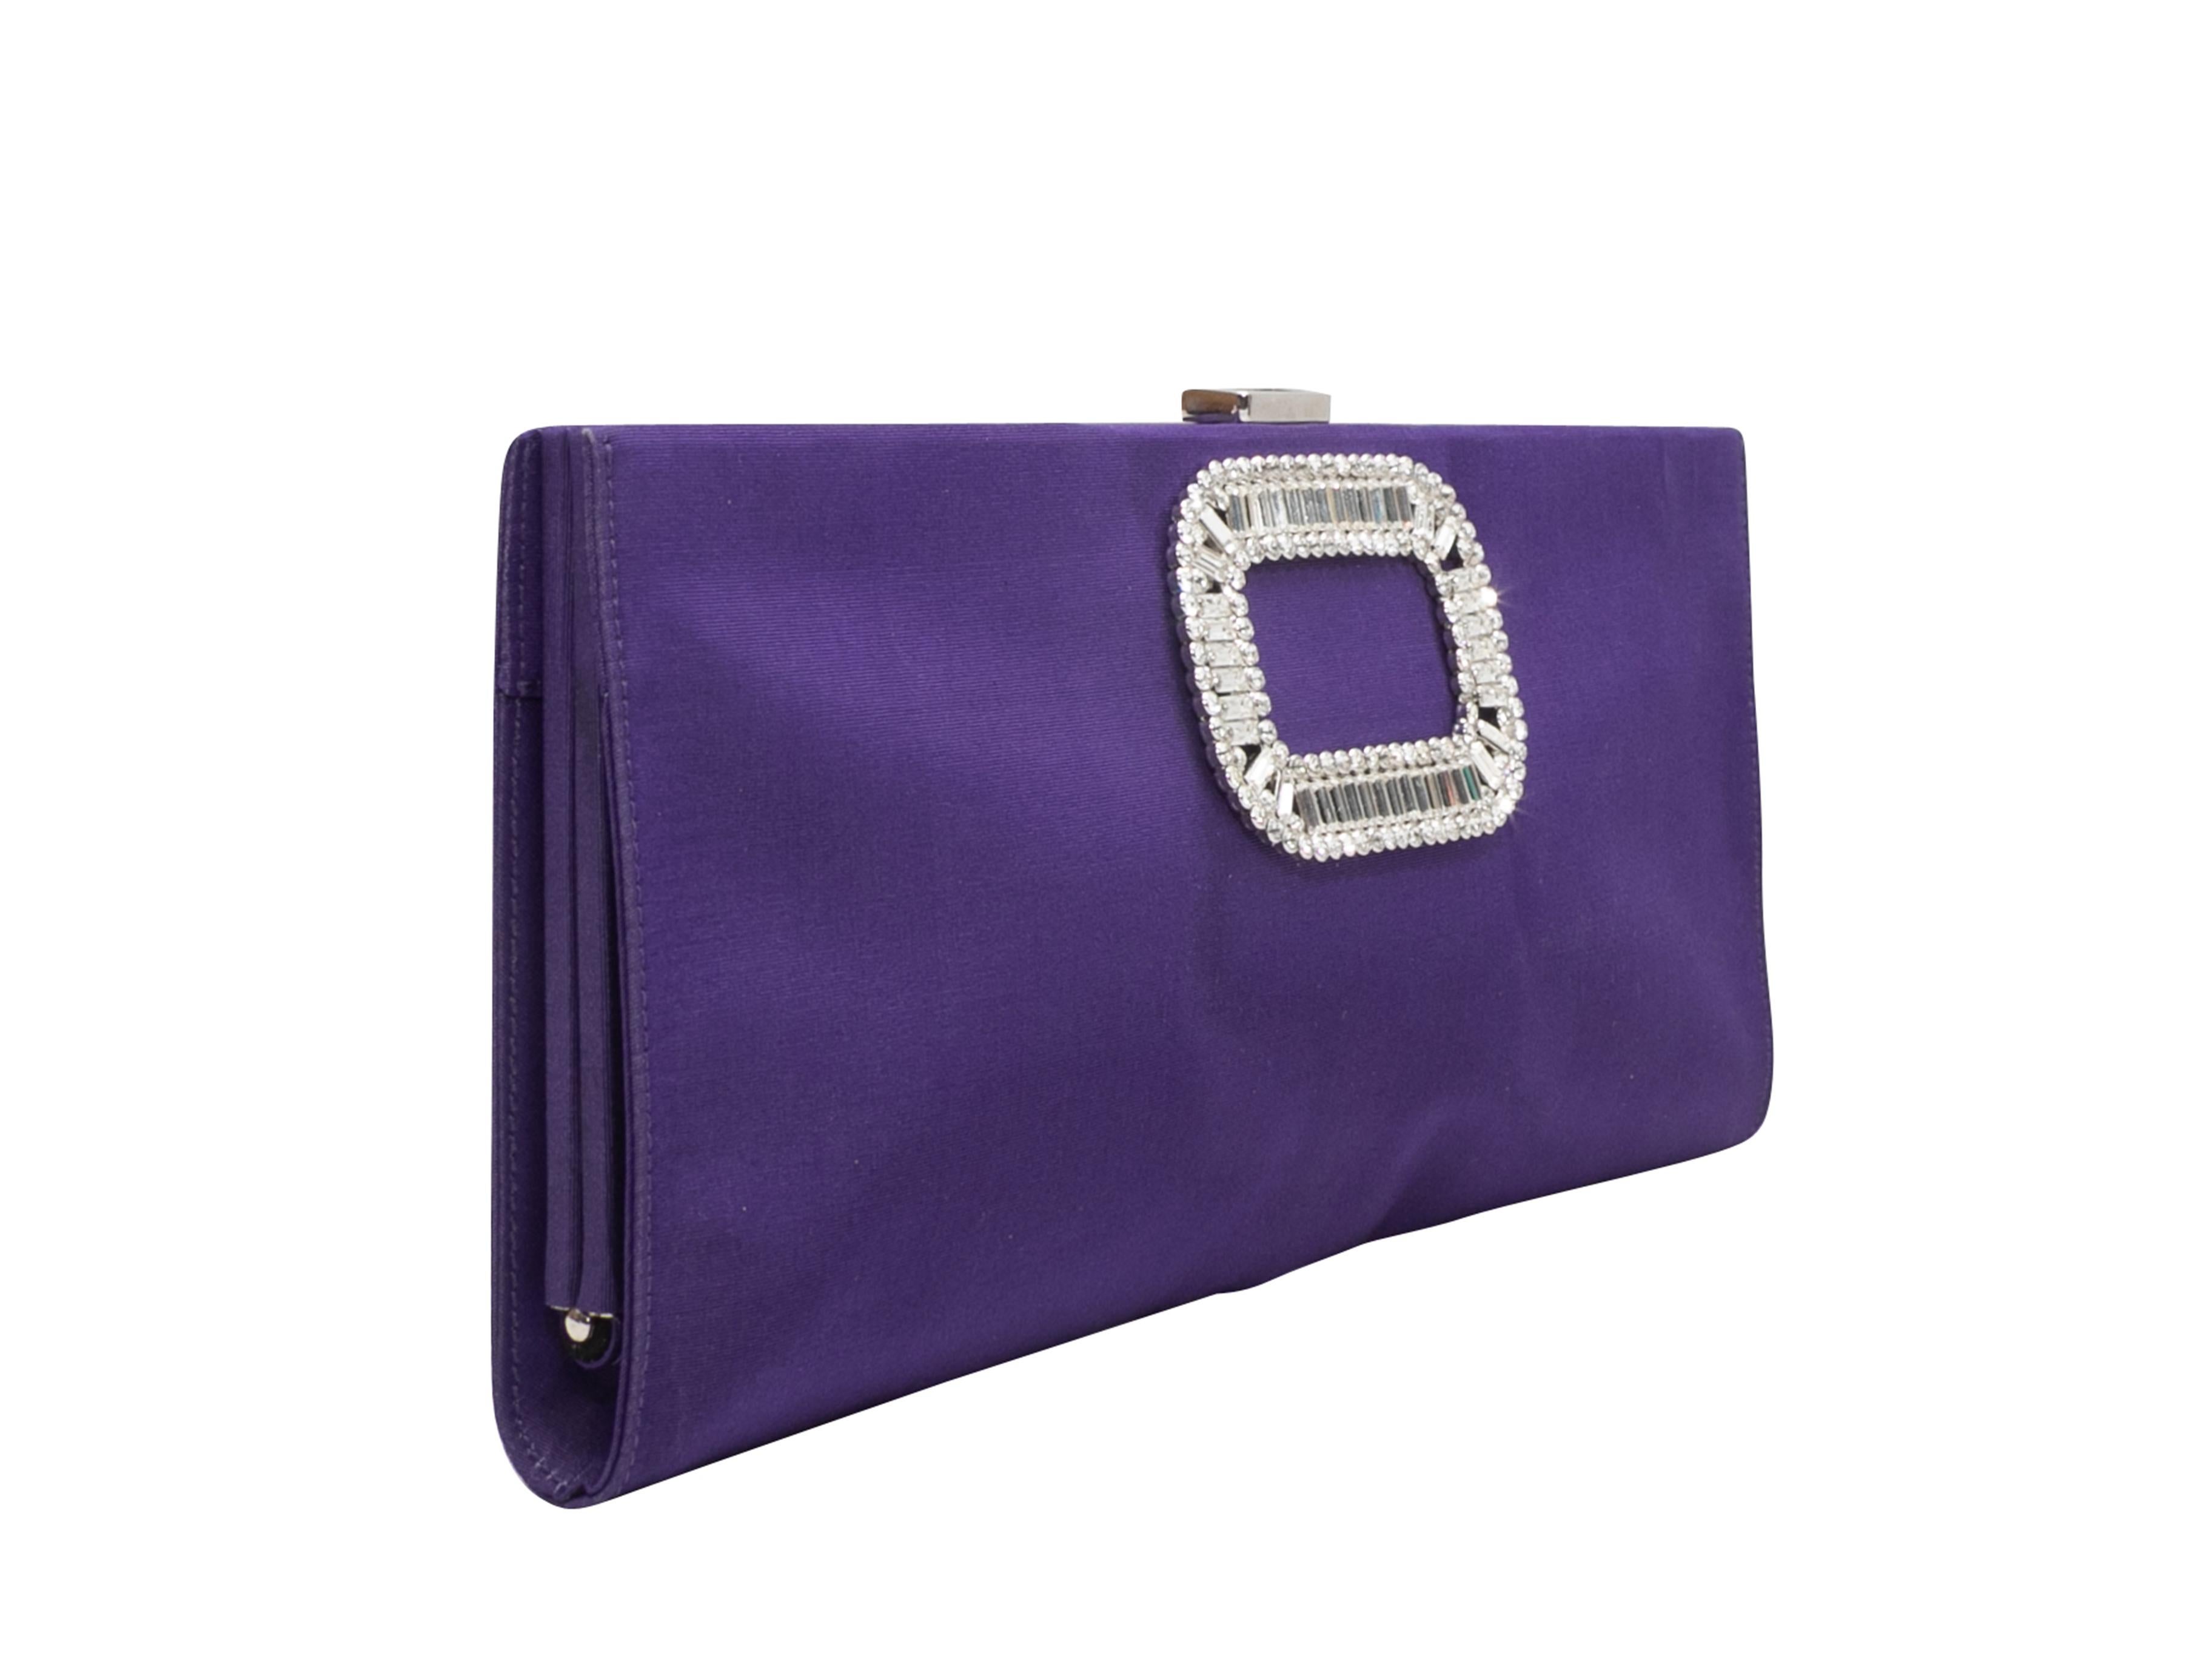 Purple Roger Vivier Satin Crystal-Embellished Clutch. This clutch features a satin body, silver-tone hardware, a Strass crystal-embellished buckle adornment at front, and a top clasp closure. 10.75